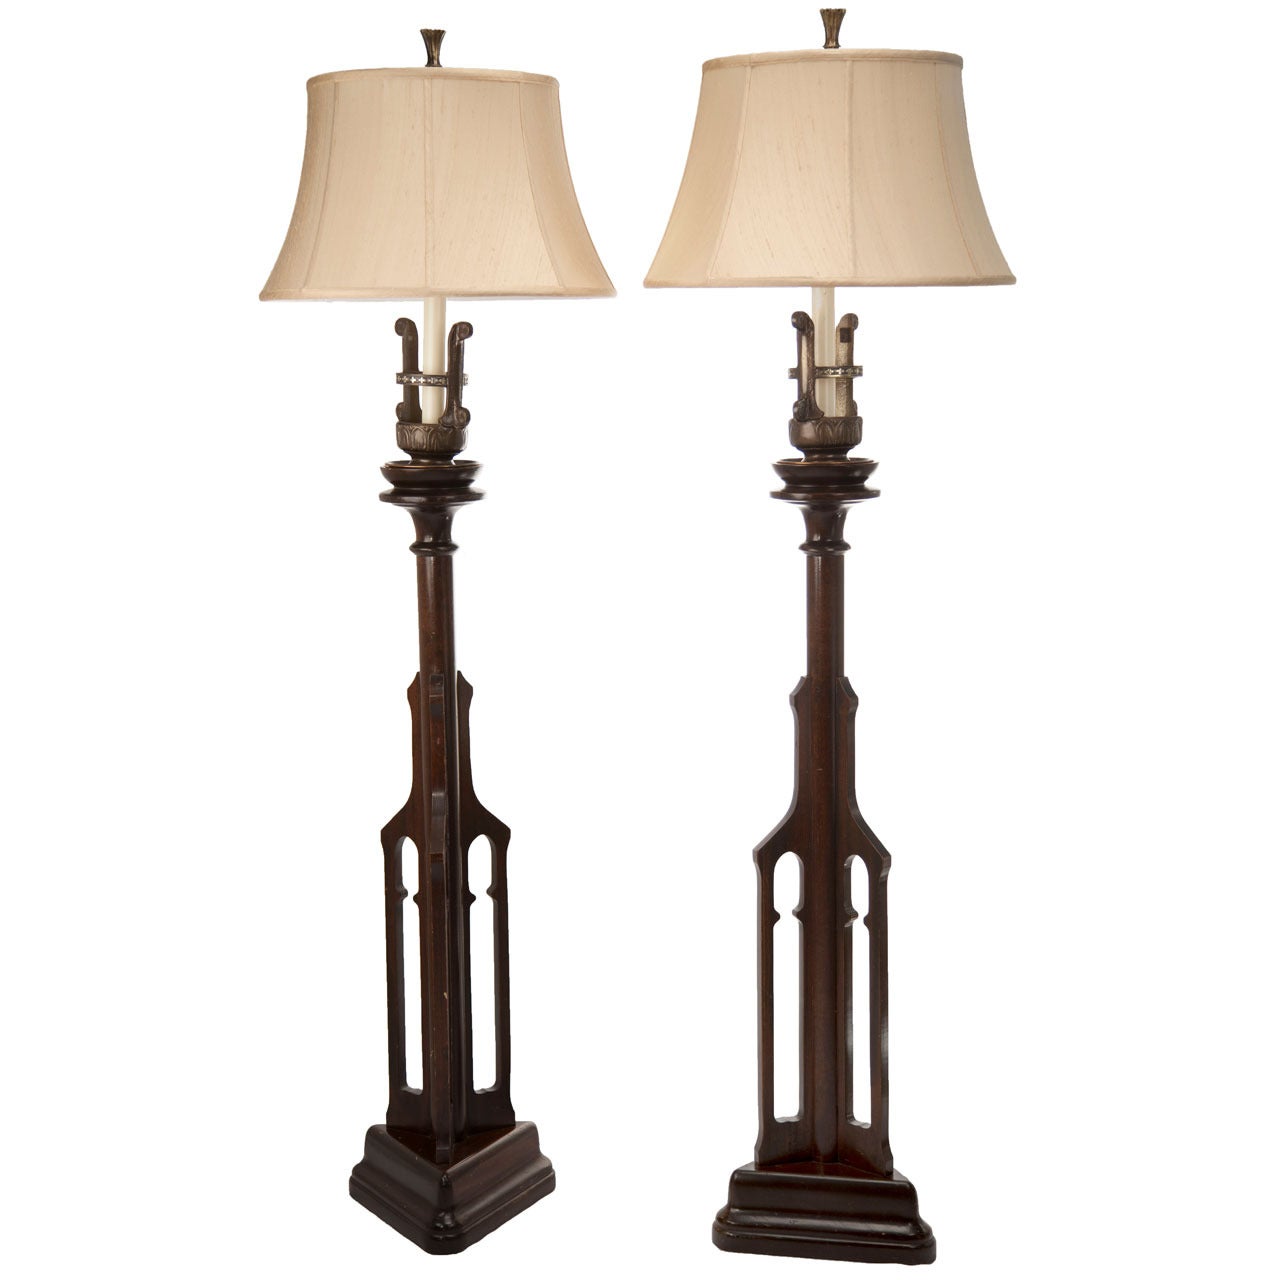 English Gothic Revival Floor Lamps